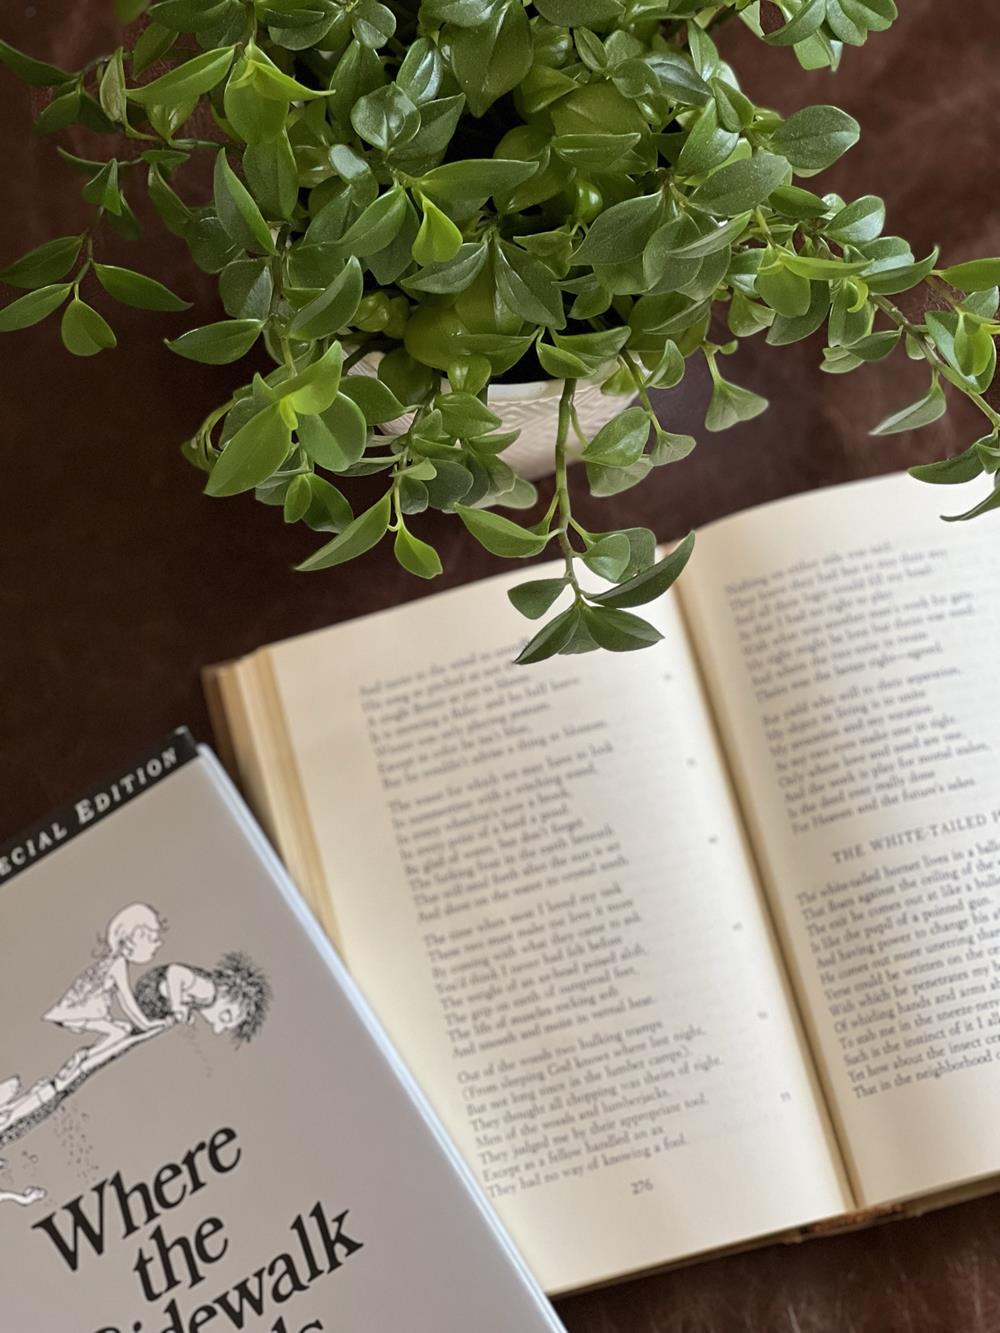 Poetry books and plants